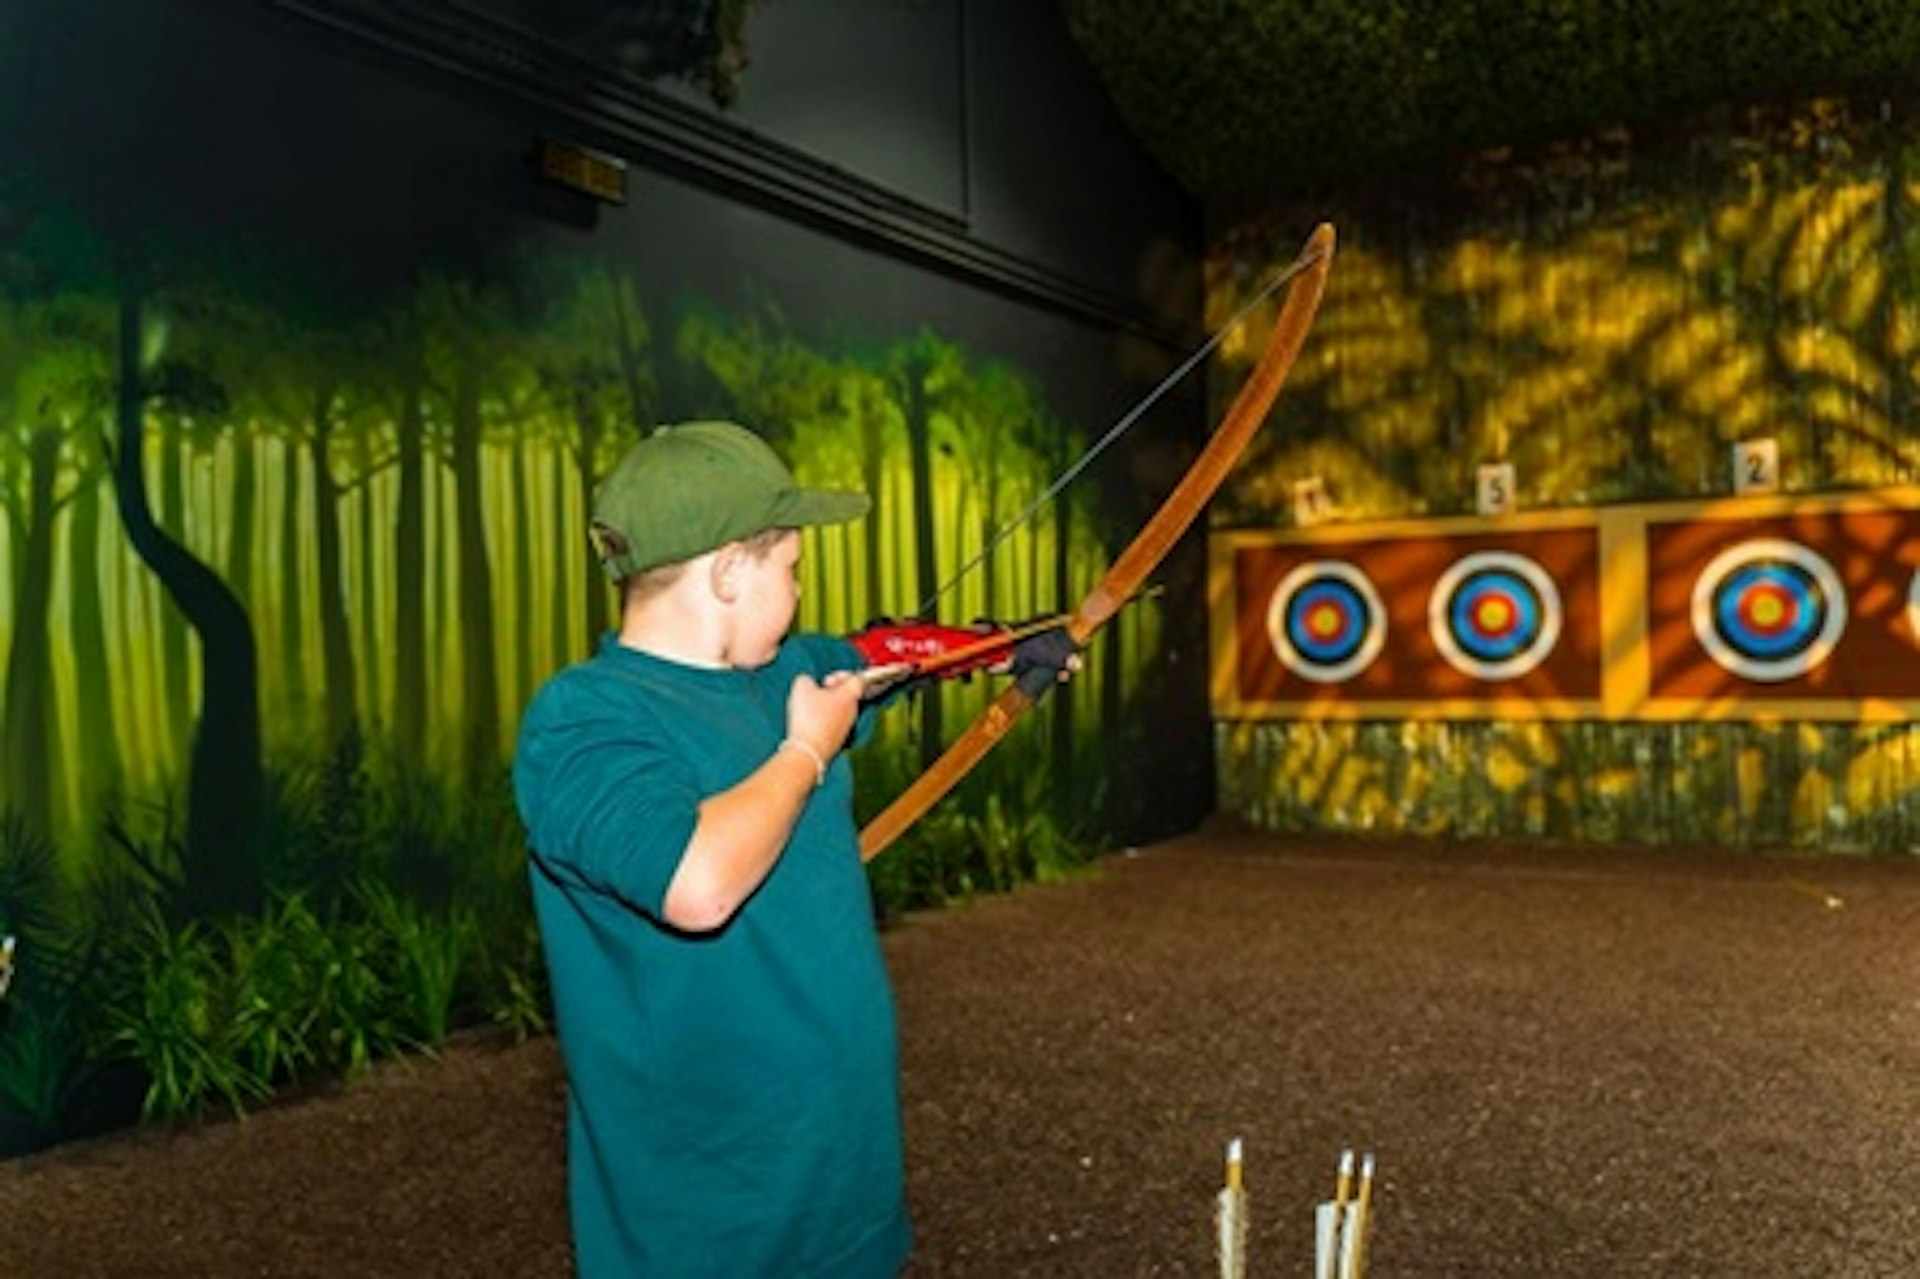 Archery Experience at The Bear Grylls Adventure 2